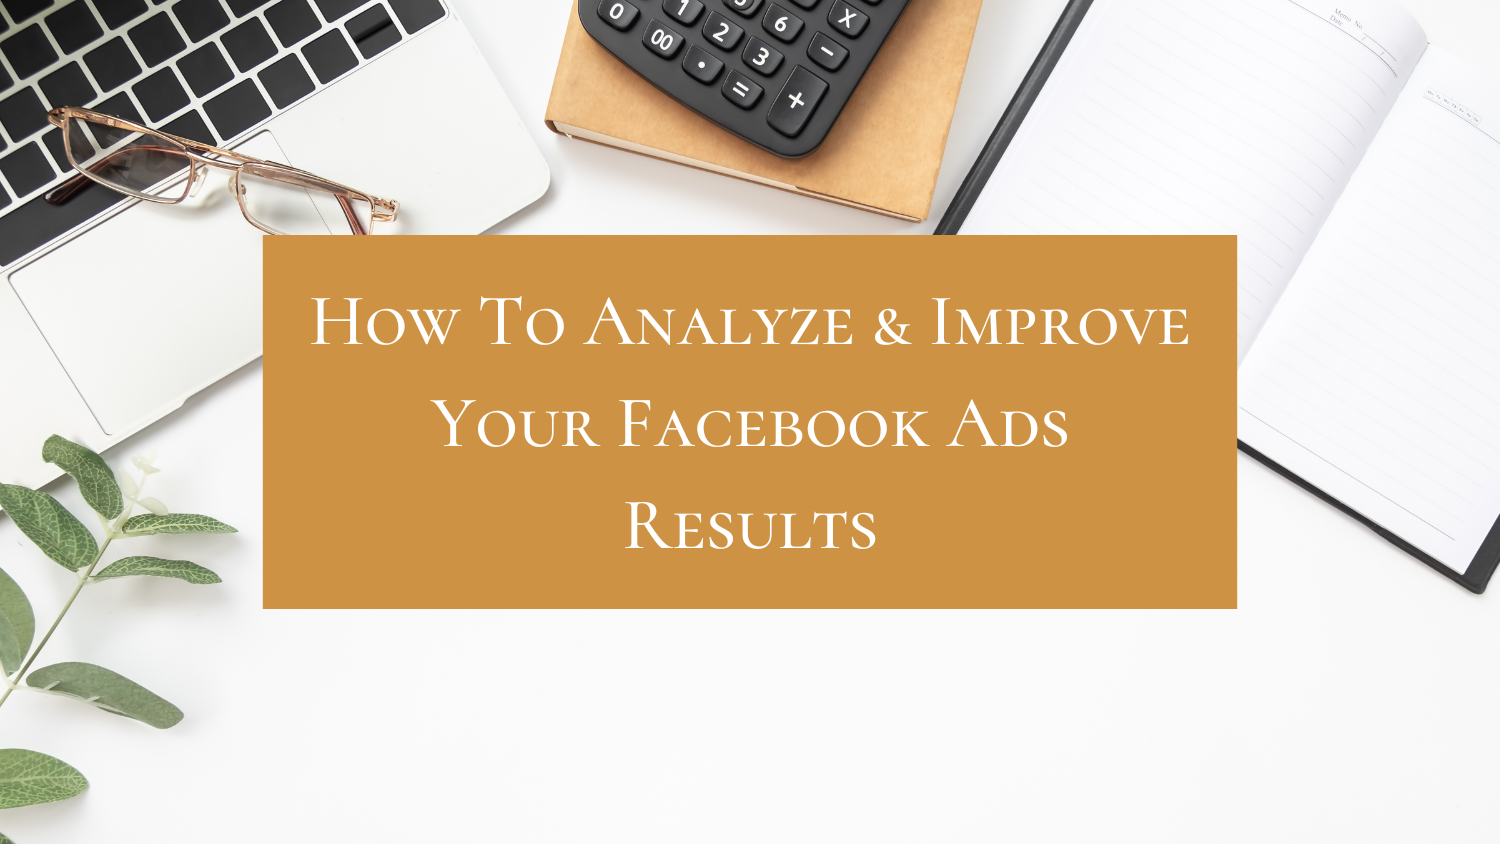 How to analyze and improve your Facebook Ads results